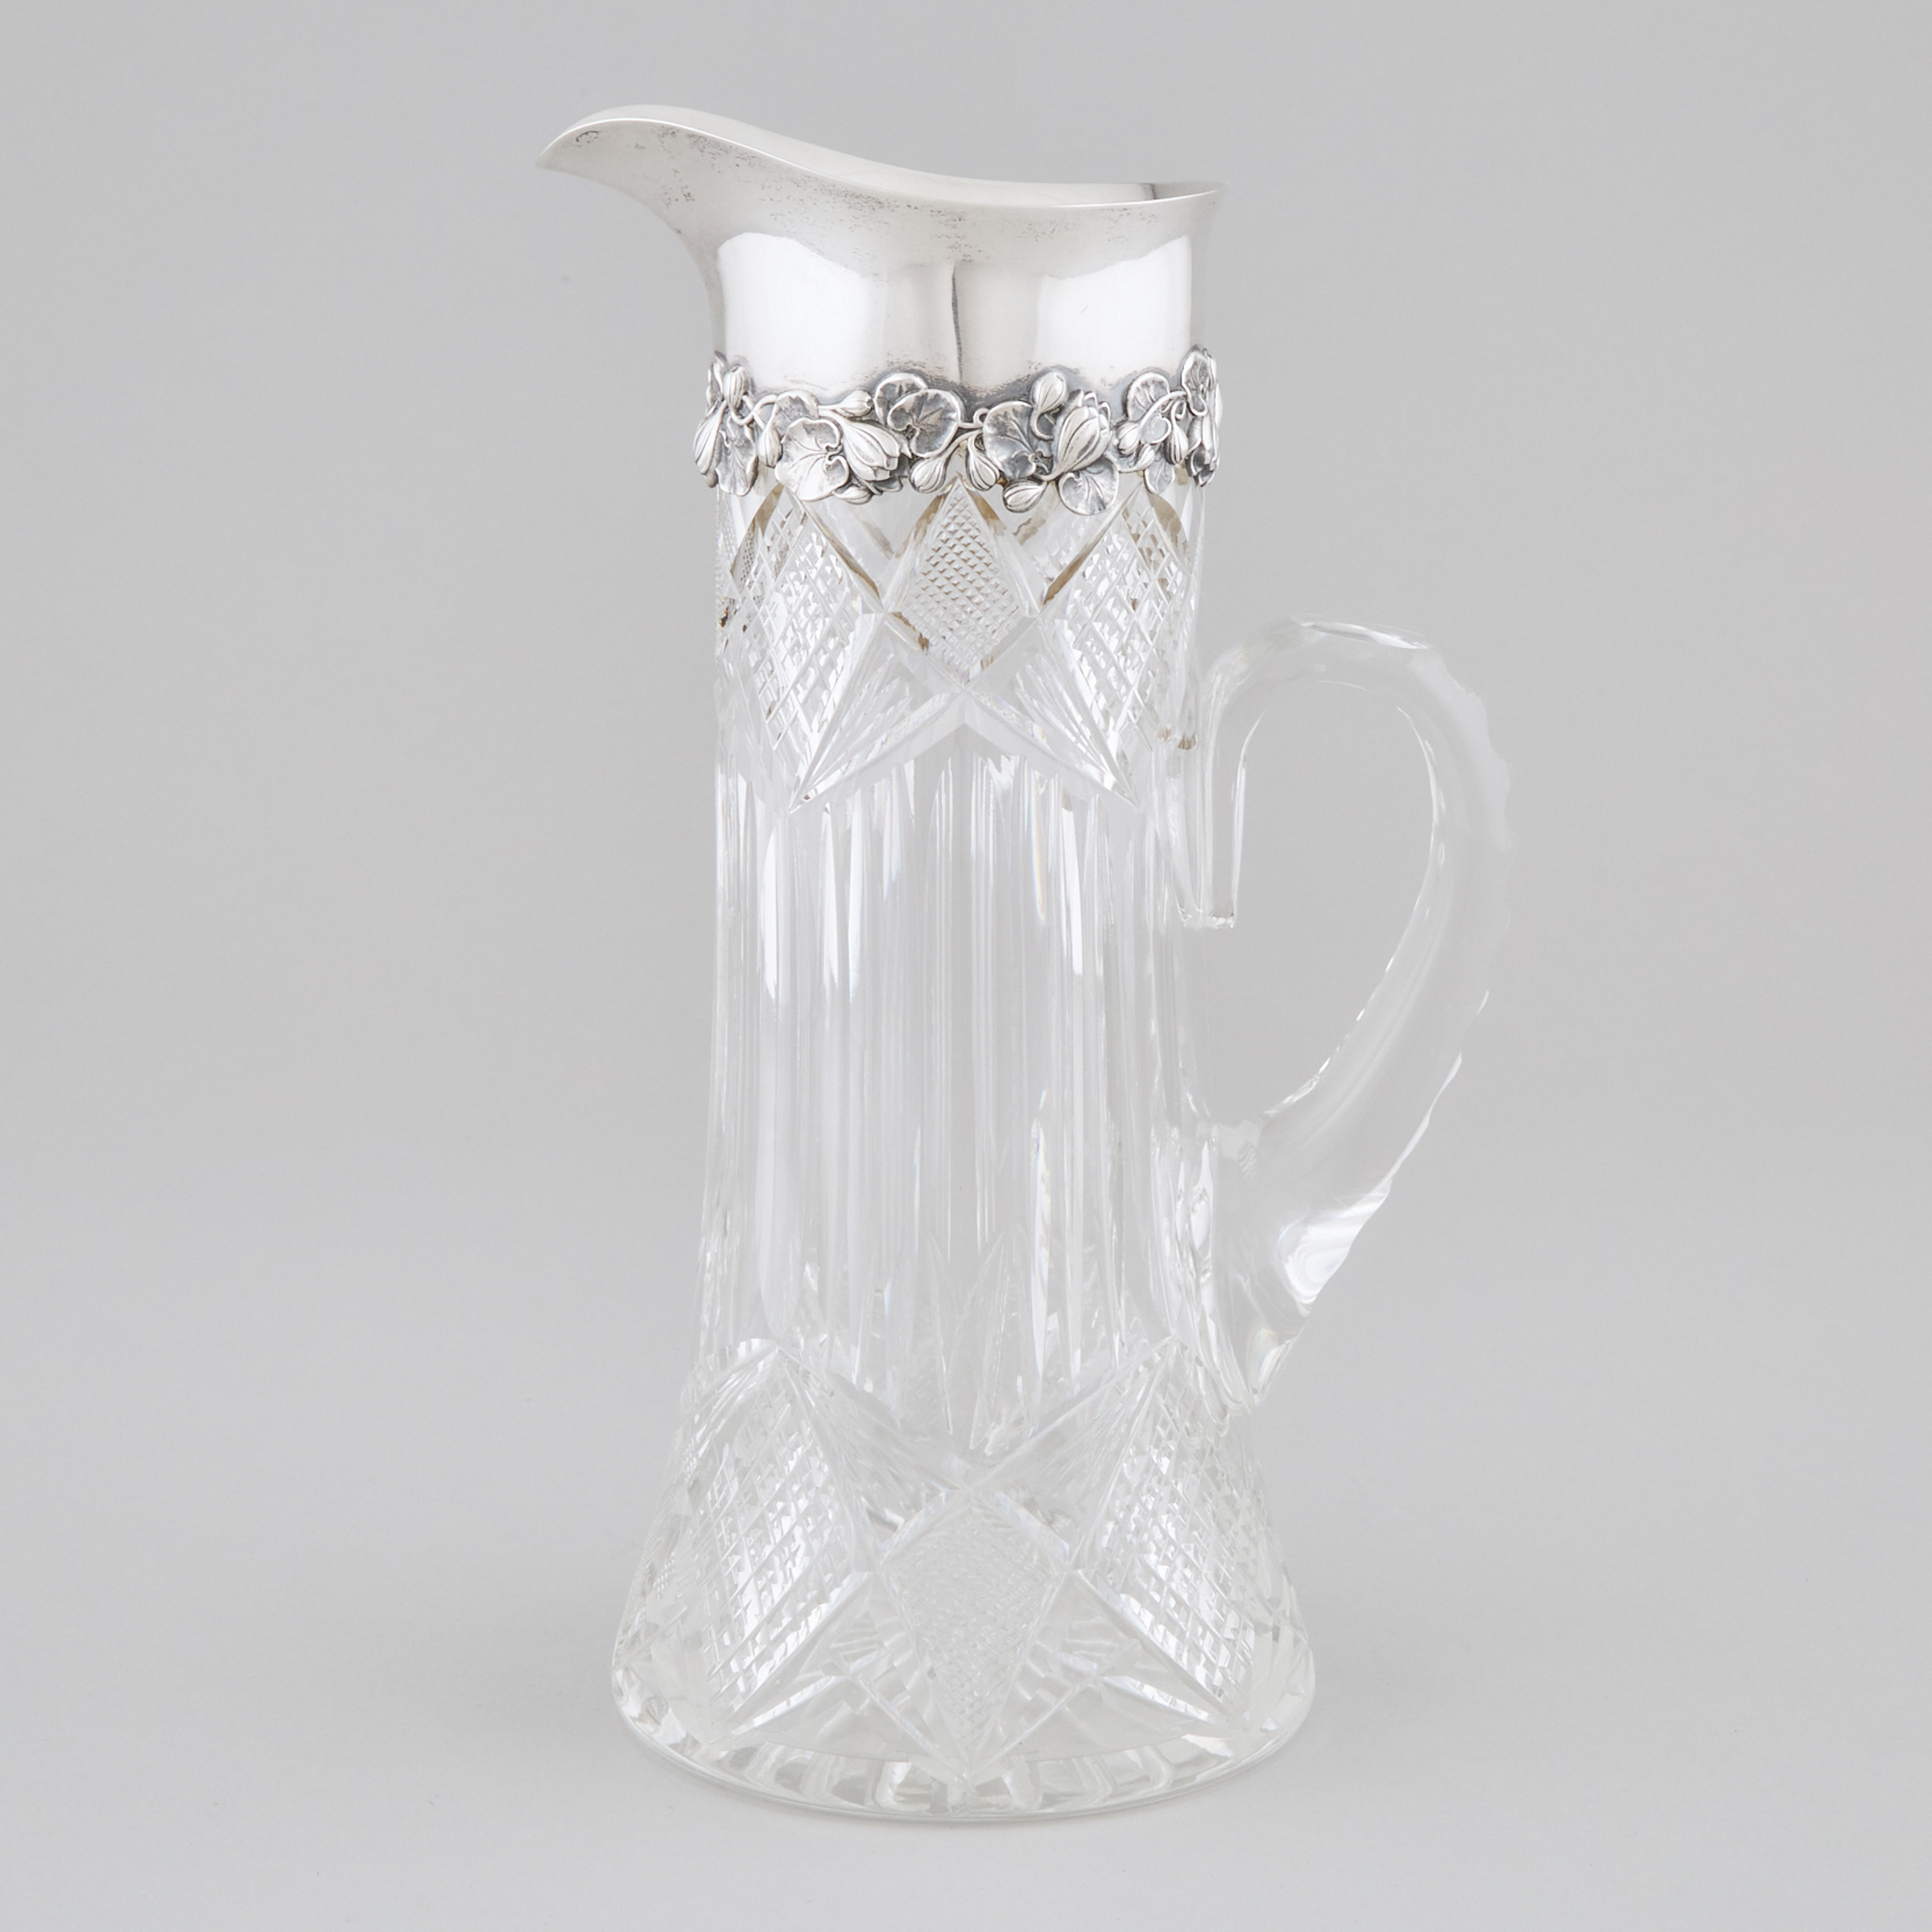 American Silver Mounted Cut Glass Jug, Gorham Mfg. Co., Providence, R.I., early 20th century